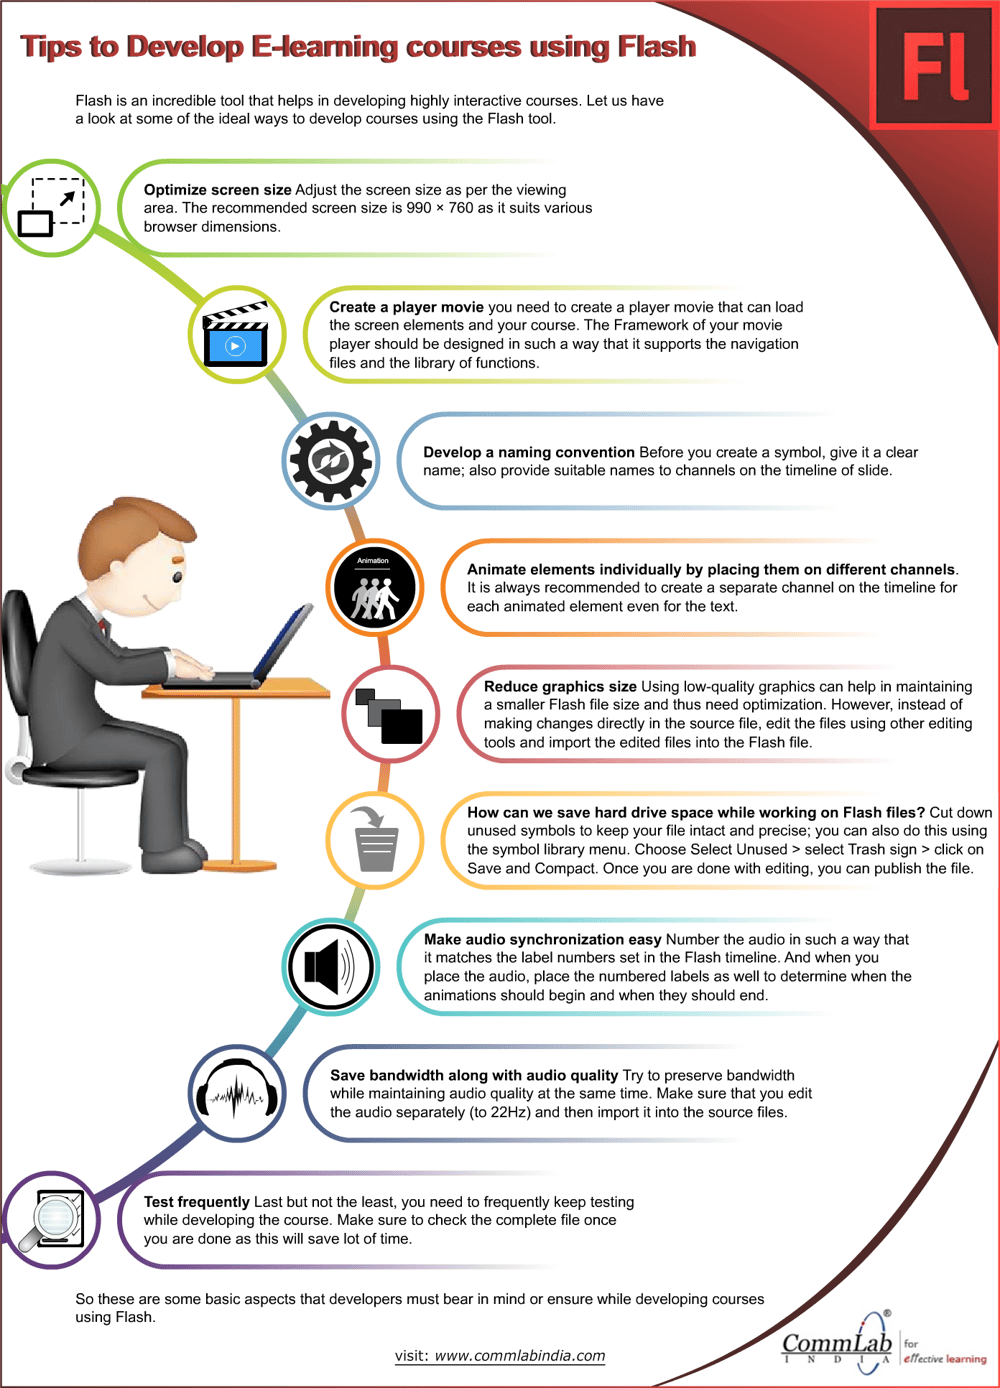 Tips to Develop E-learning Courses Using Flash - An Infographic